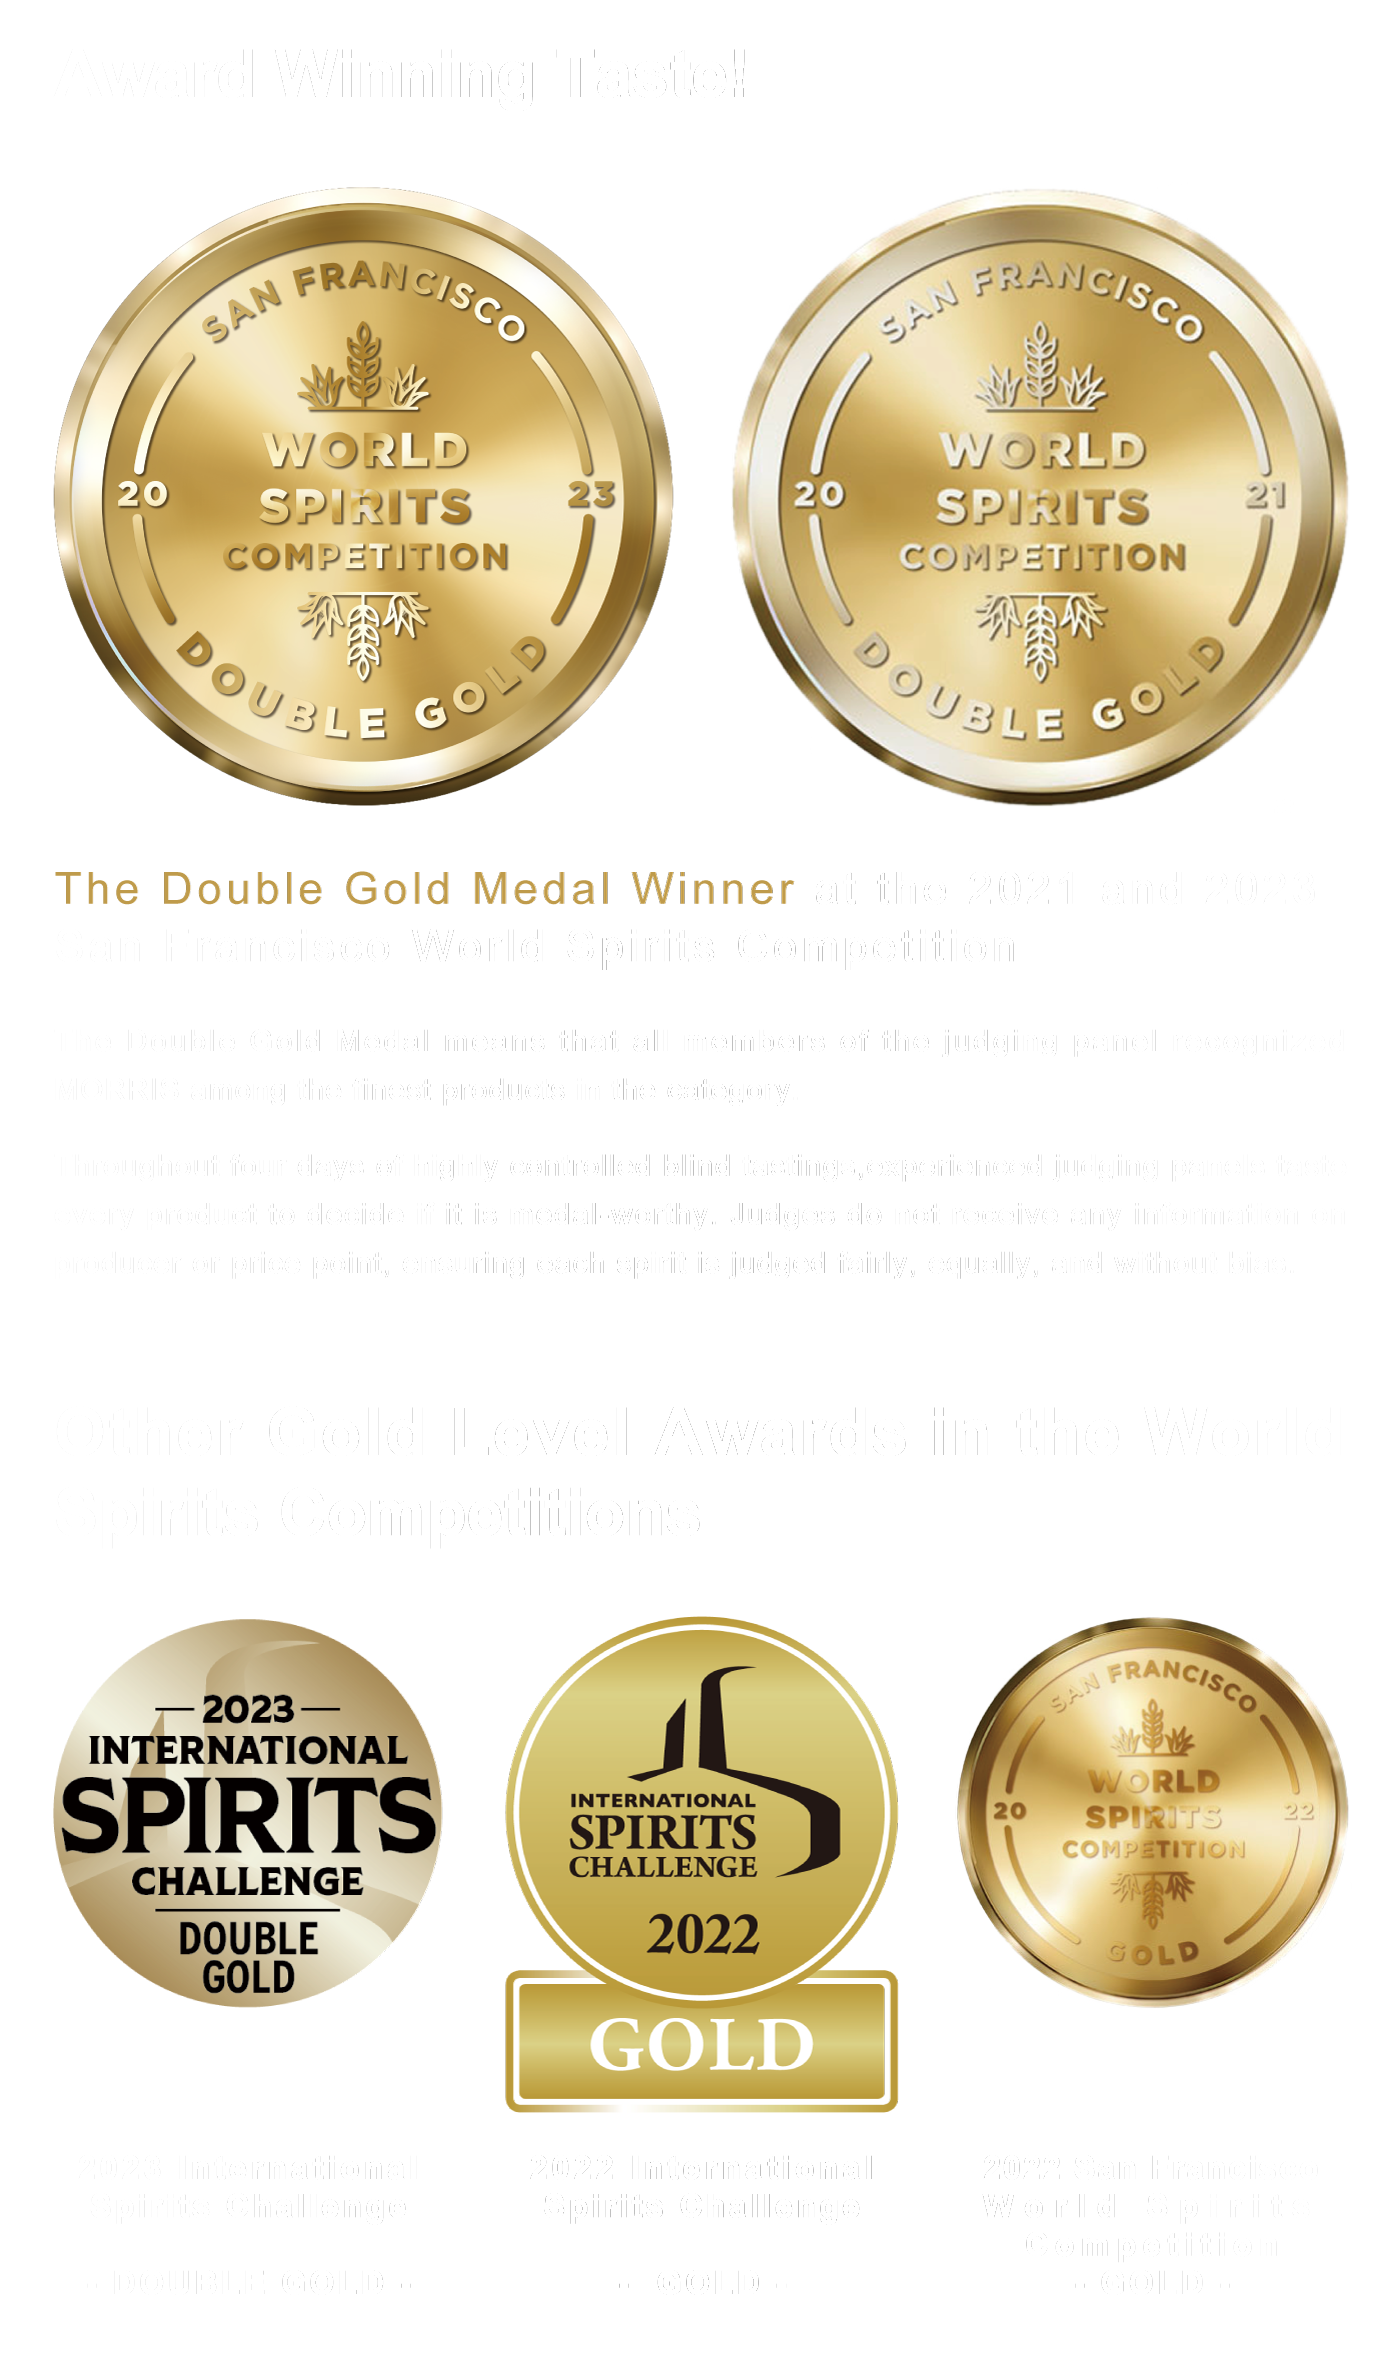 Award Winning Taste! The Double Gold Medal Winner at the 2021 San Francisco World Spirits Competition